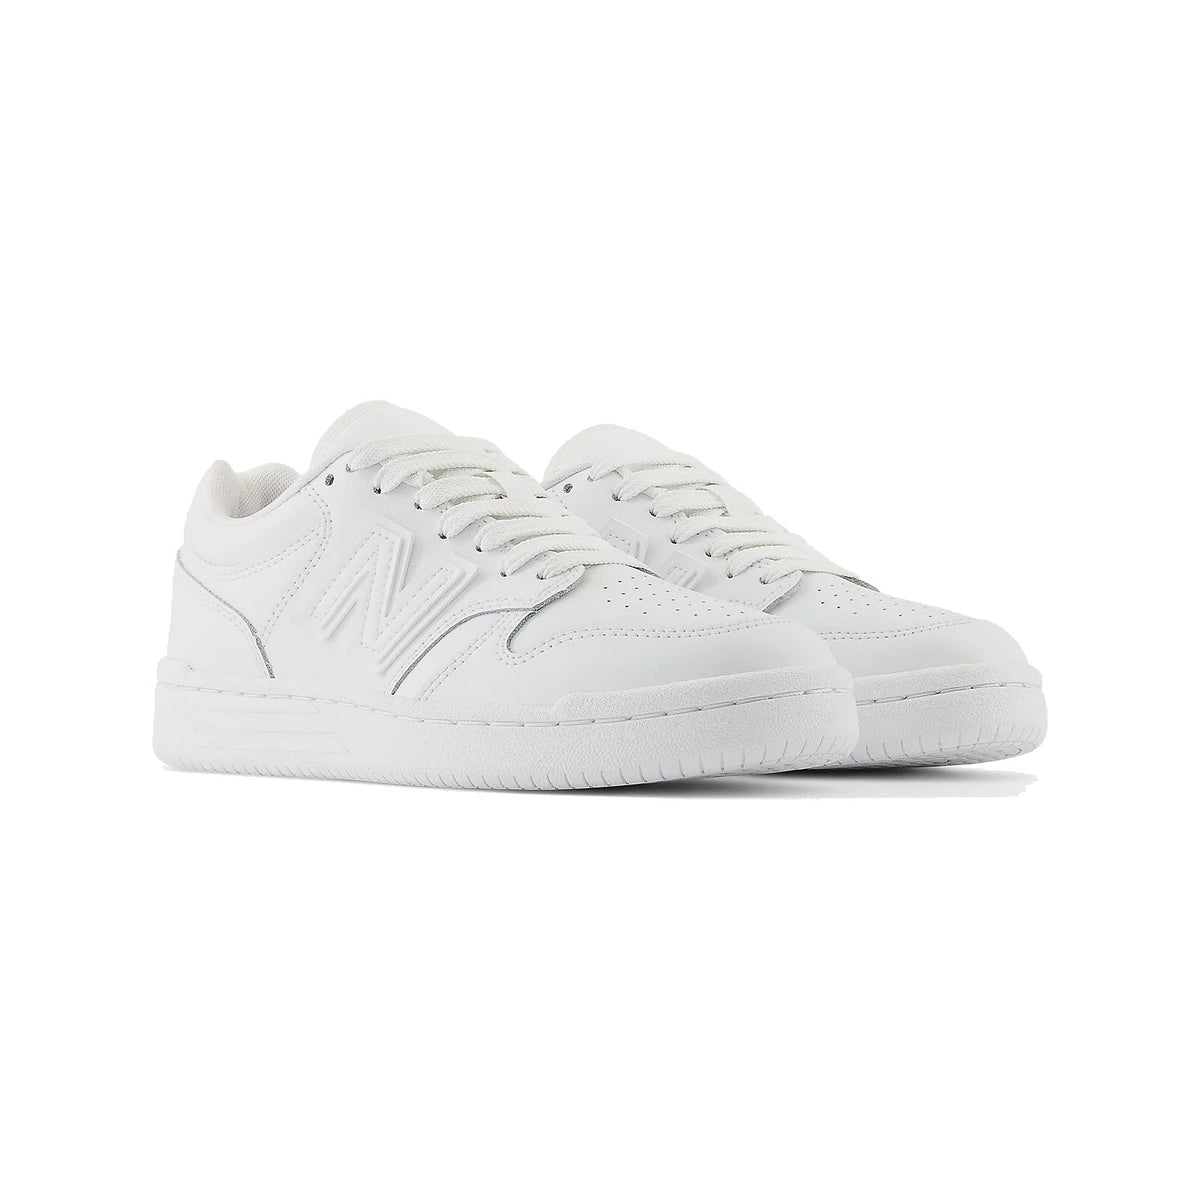 A pair of New Balance Kids 480 sneakers crafted from high-performance synthetic materials, displayed on a white background.
Product Name: NEW BALANCE 480 WHITE - KIDS
Brand Name: New Balance